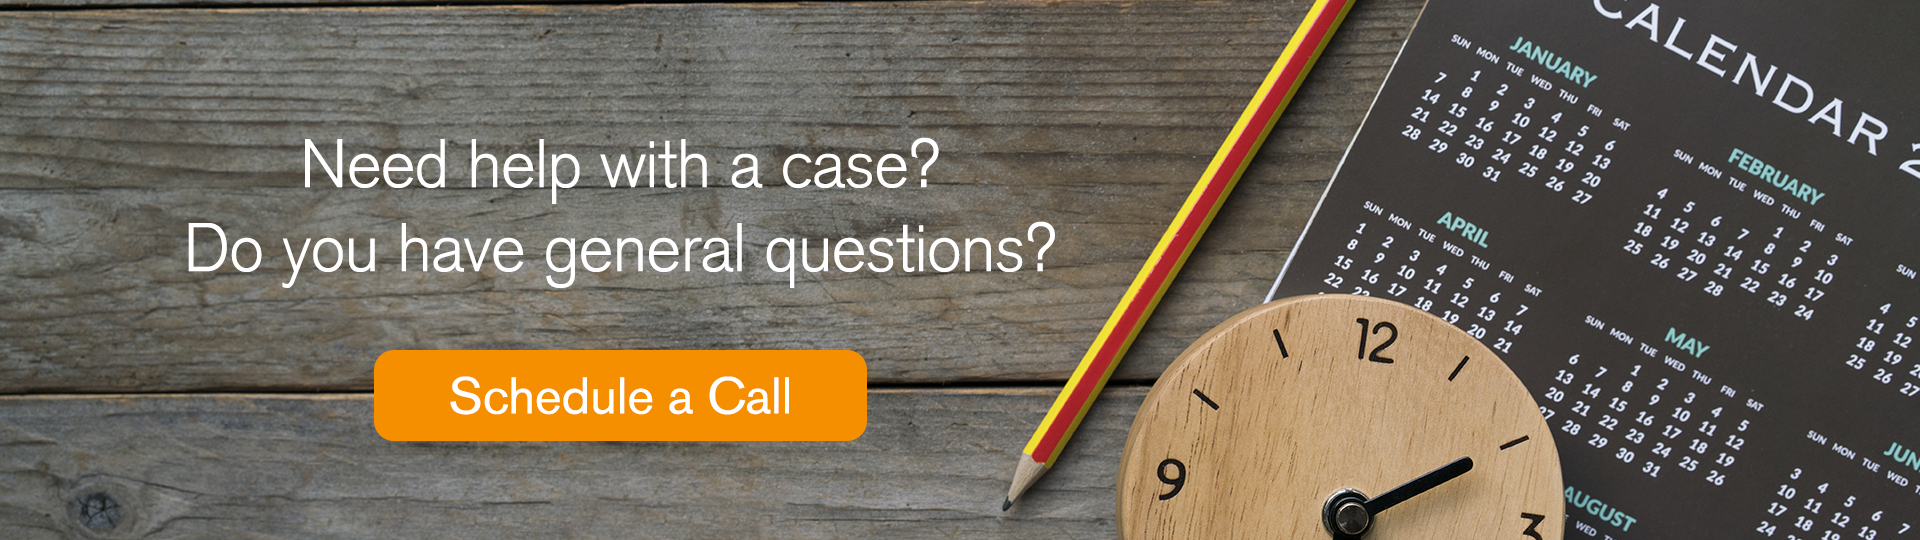 Need help with a case? Do you have general questions? Click here to schedule a call.